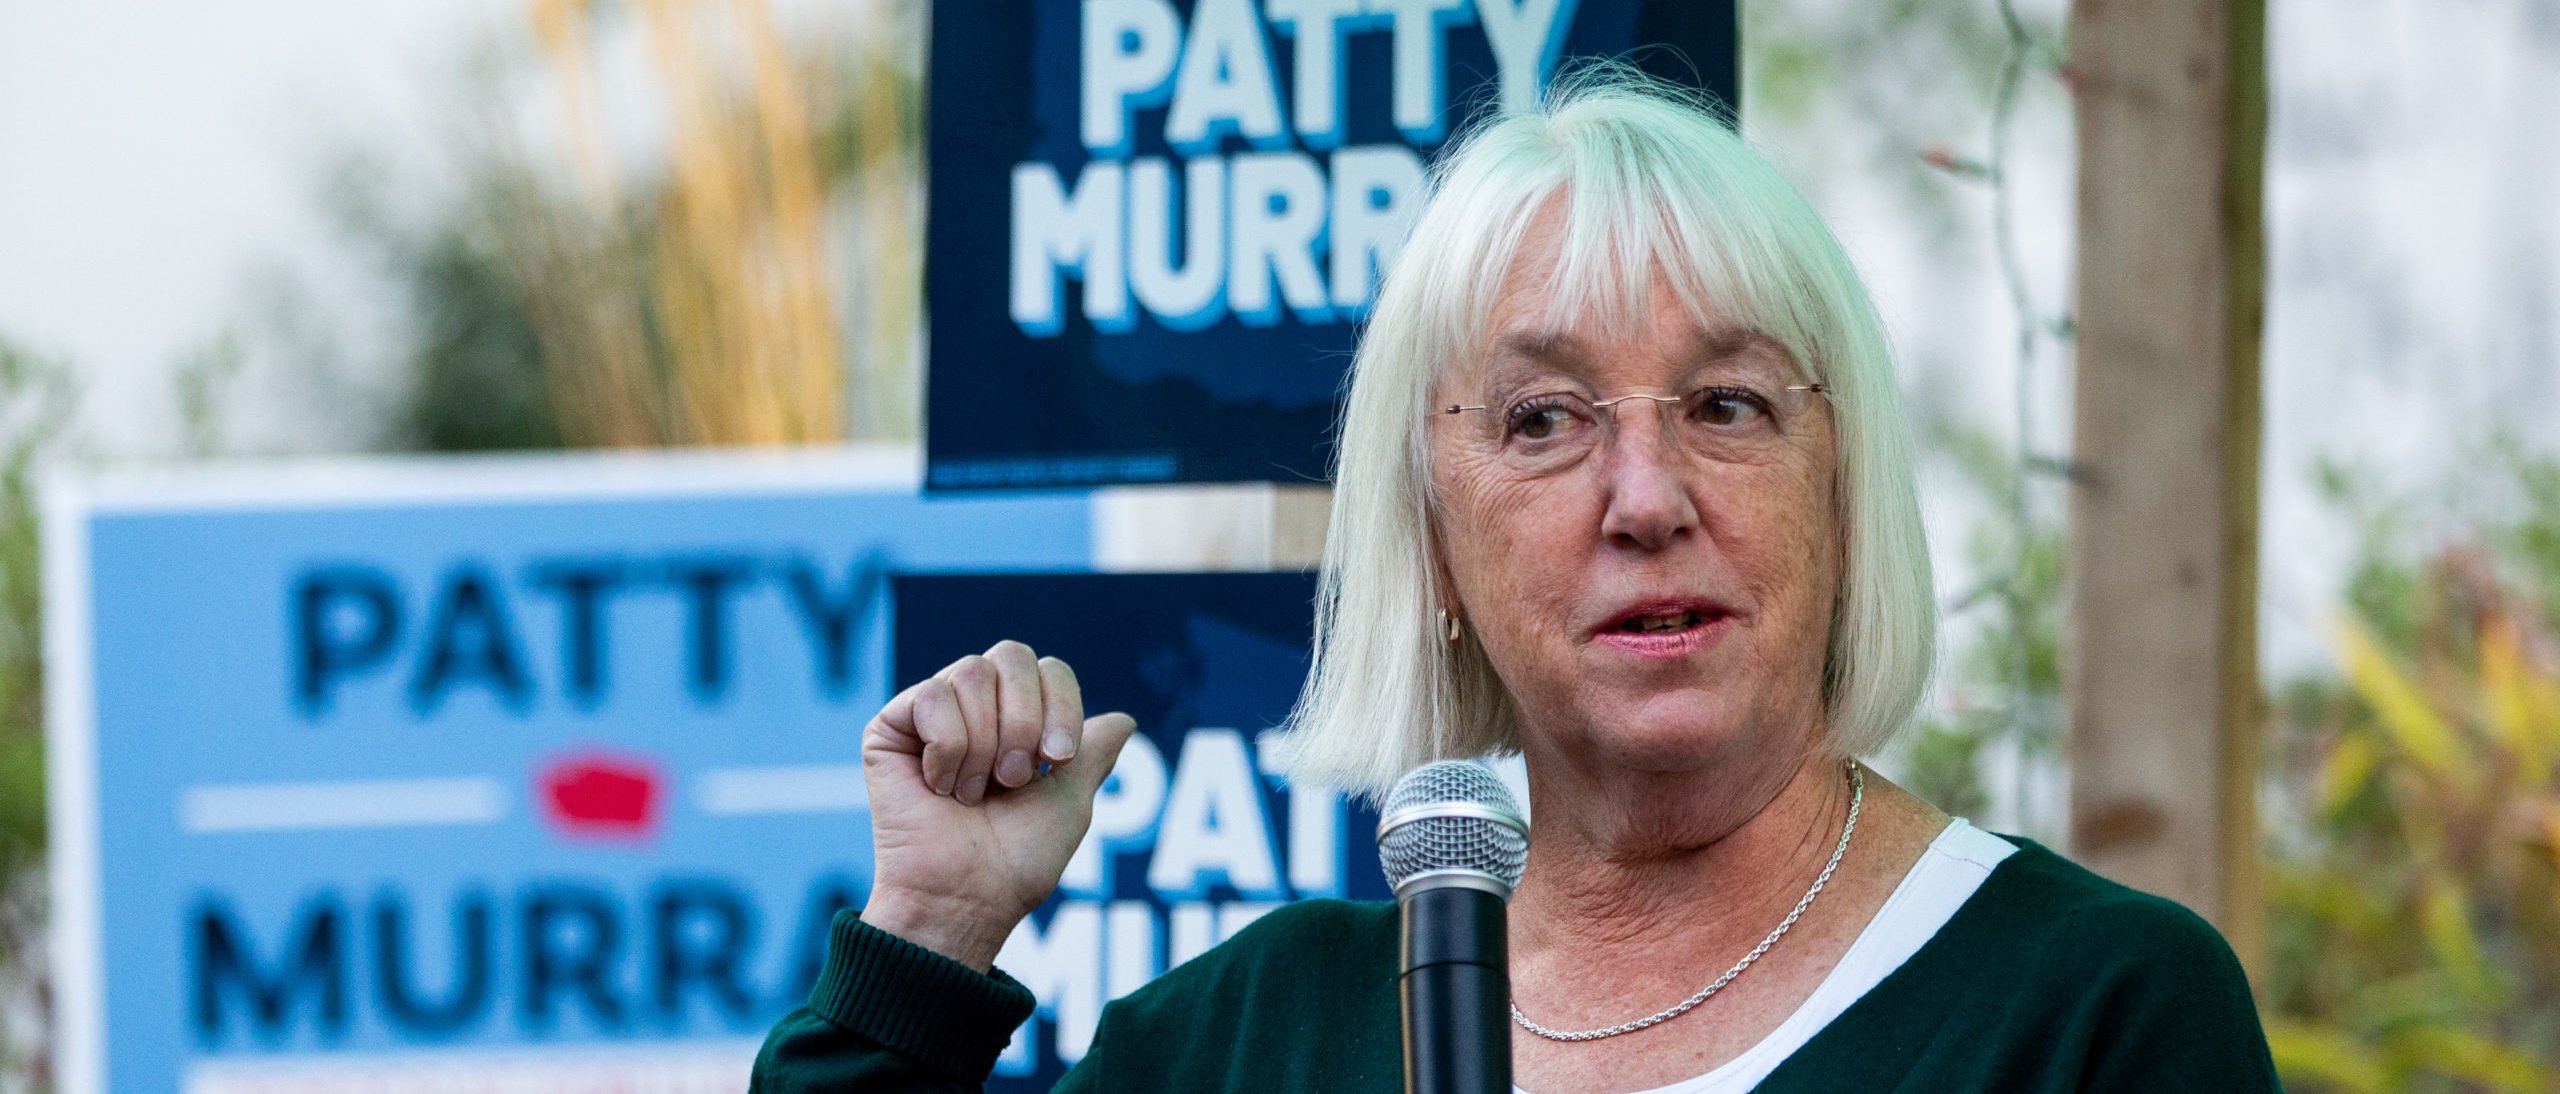 SEATTLE, WA - OCTOBER 13: Sen. Patty Murray (D-WA) speaks during a small business town hall campaign event at Hellbent Brewing Company on October 13, 2022 in Seattle, Washington. Murray is seeking a sixth term in the United States Senate. (Photo by Lindsey Wasson/Getty Images)